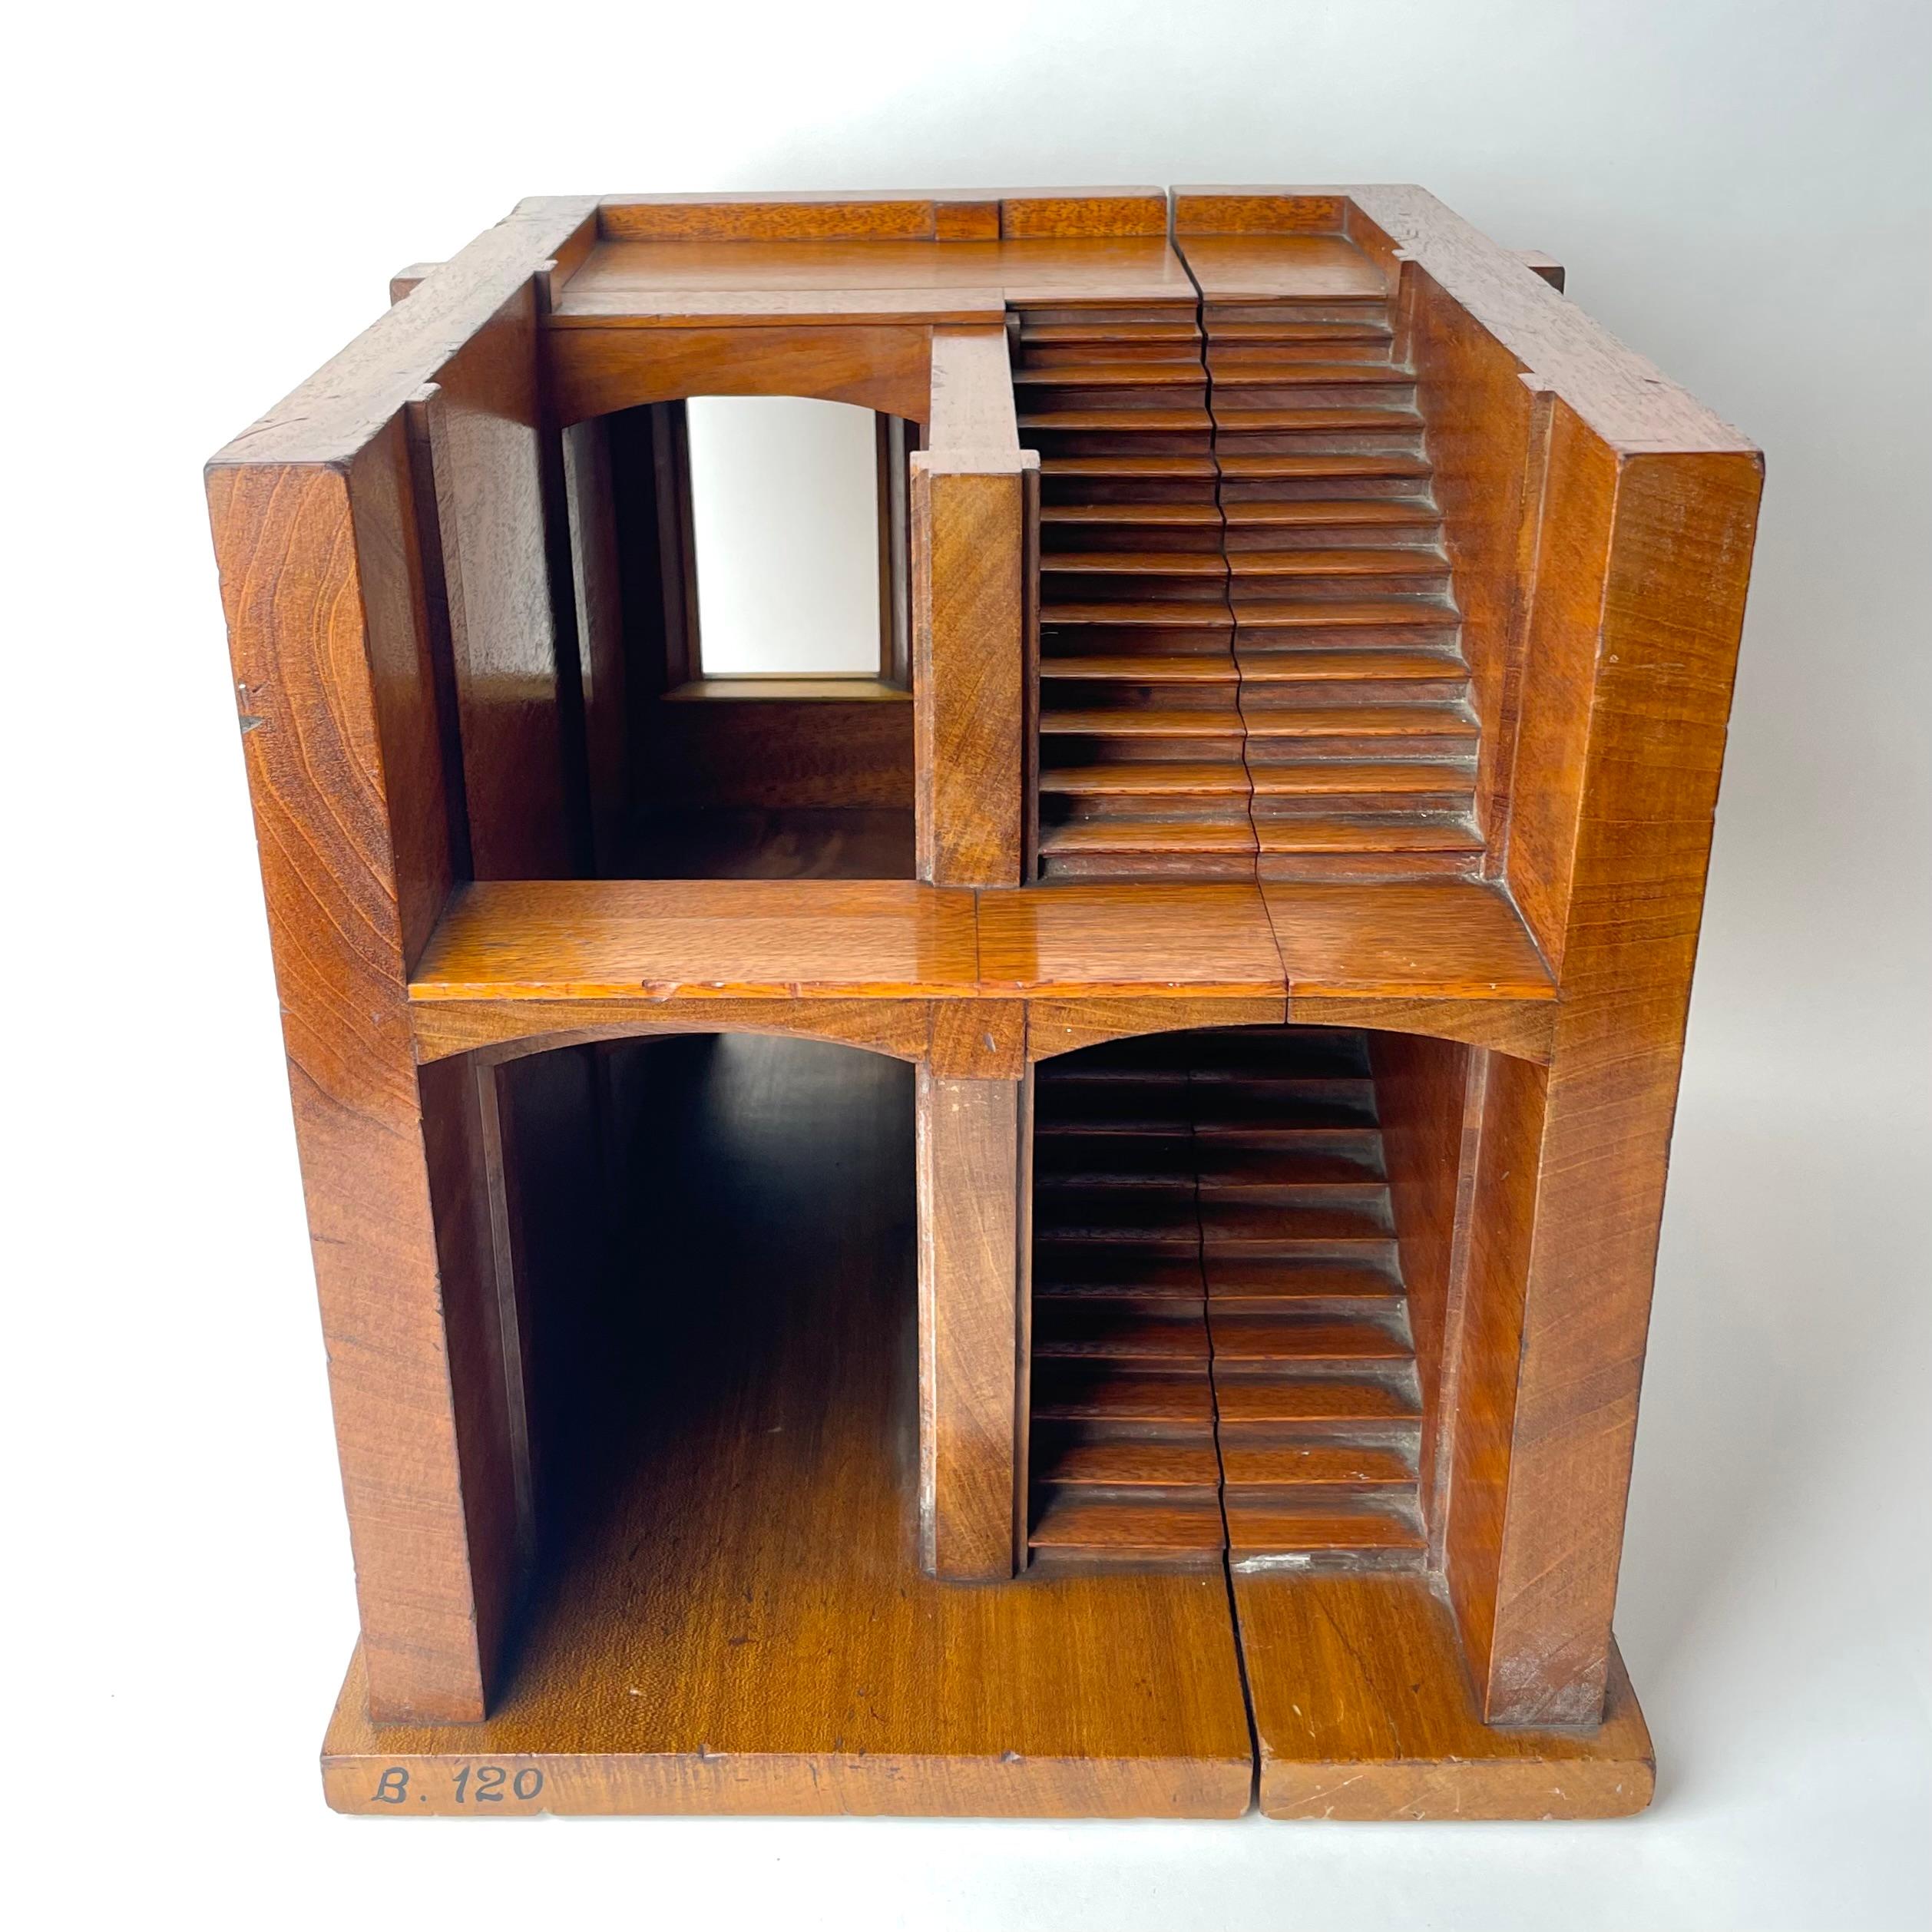 19th Century Mahogany Staircase Section Architectural Model, Late 19th/Early 20th C England. For Sale